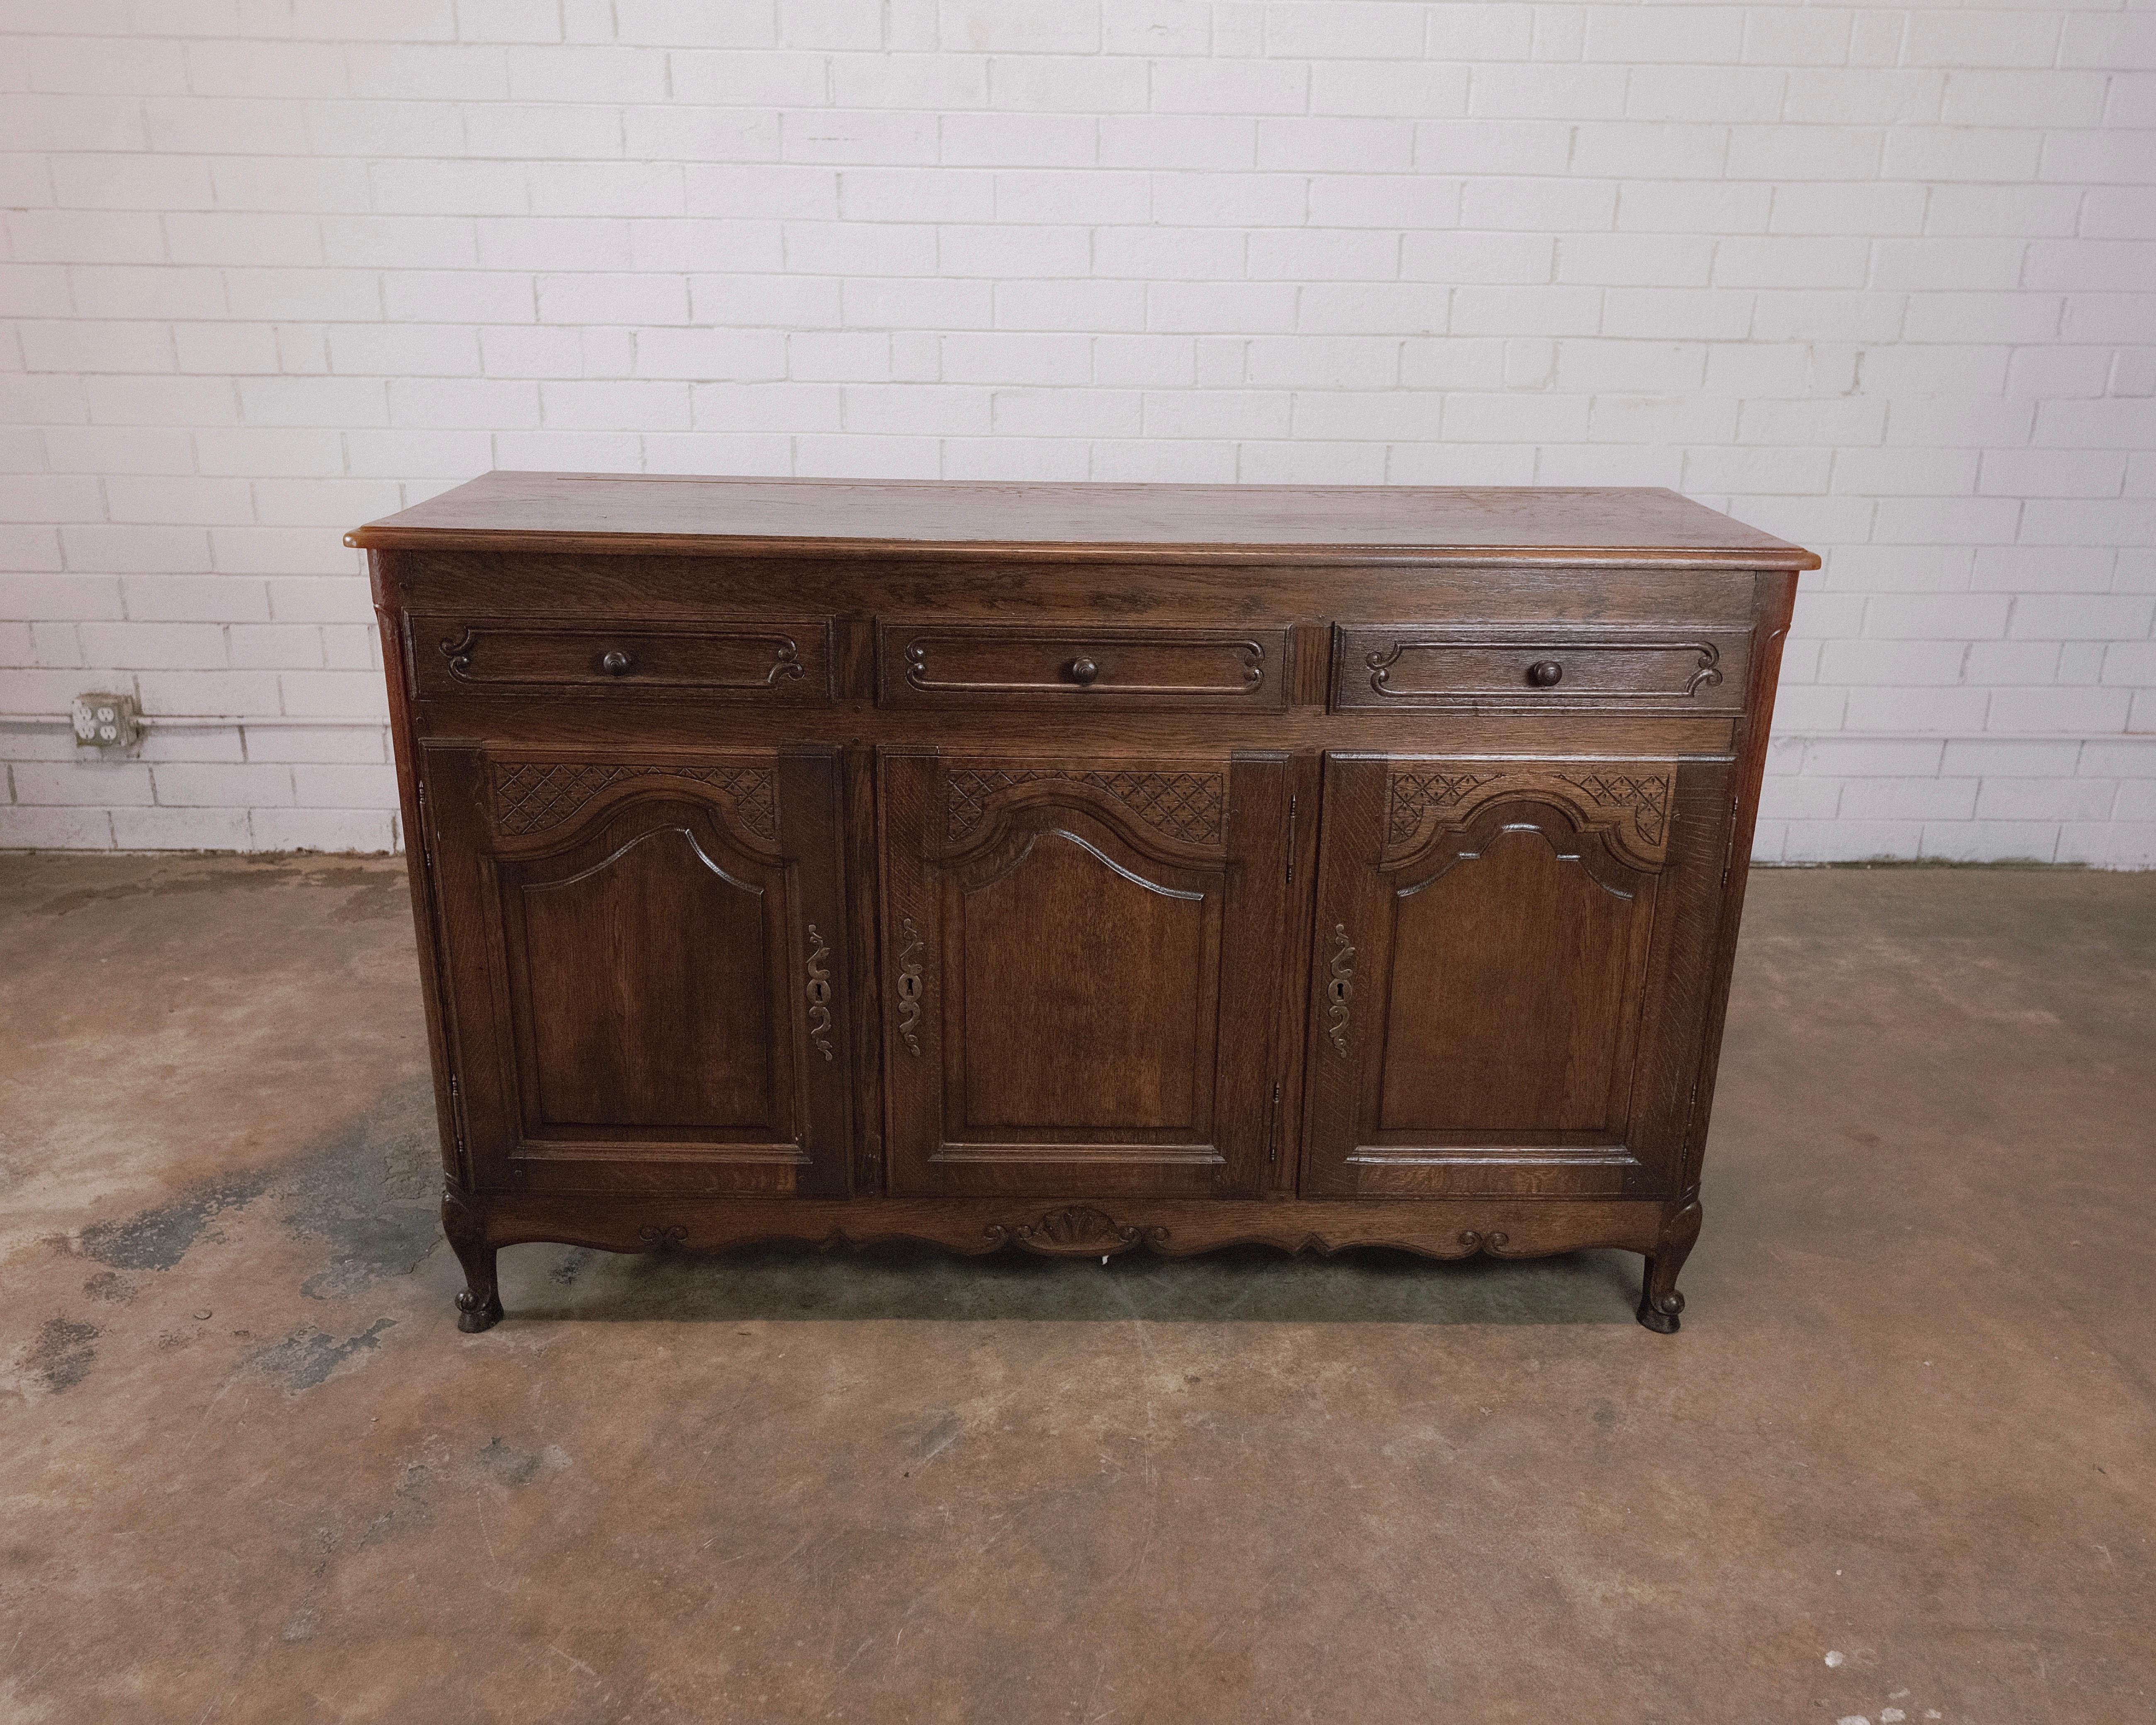 Step back in time to the rustic charm of the Late 19th to Early 20th Century with this antique French Country Sideboard in a rich, dark brown finish, adorned with beautiful brass hardware. This captivating piece encapsulates the essence of a bygone